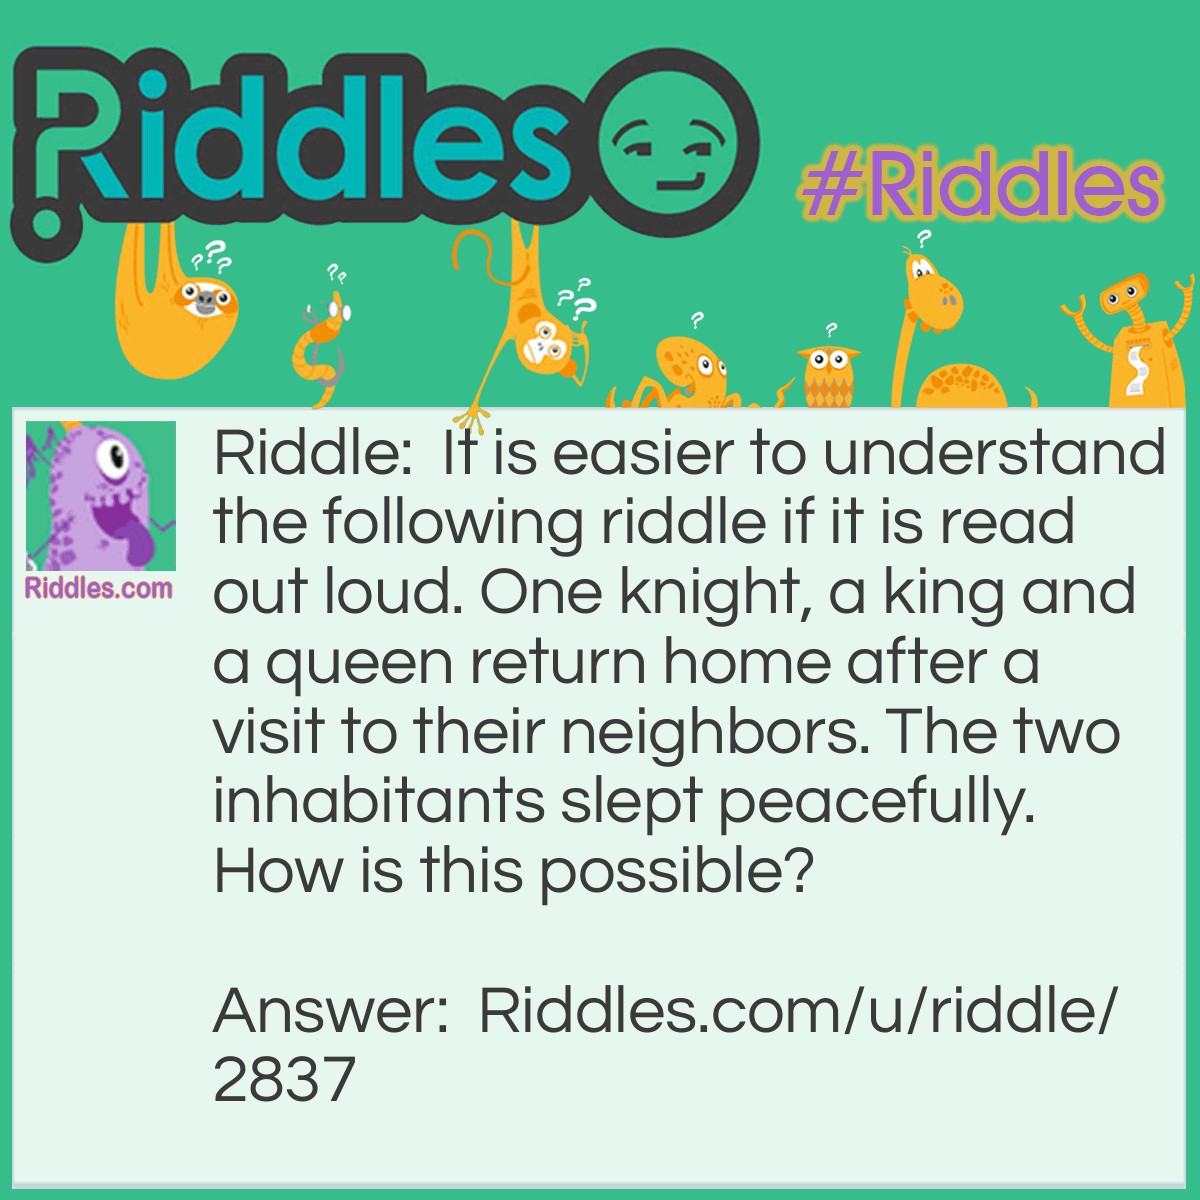 Riddle: It is easier to understand the following riddle if it is read out loud. One knight, a king and a queen return home after a visit to their neighbors. The two inhabitants slept peacefully. How is this possible? Answer: One night, a king and a queen returned home after a visit to their neighbors.